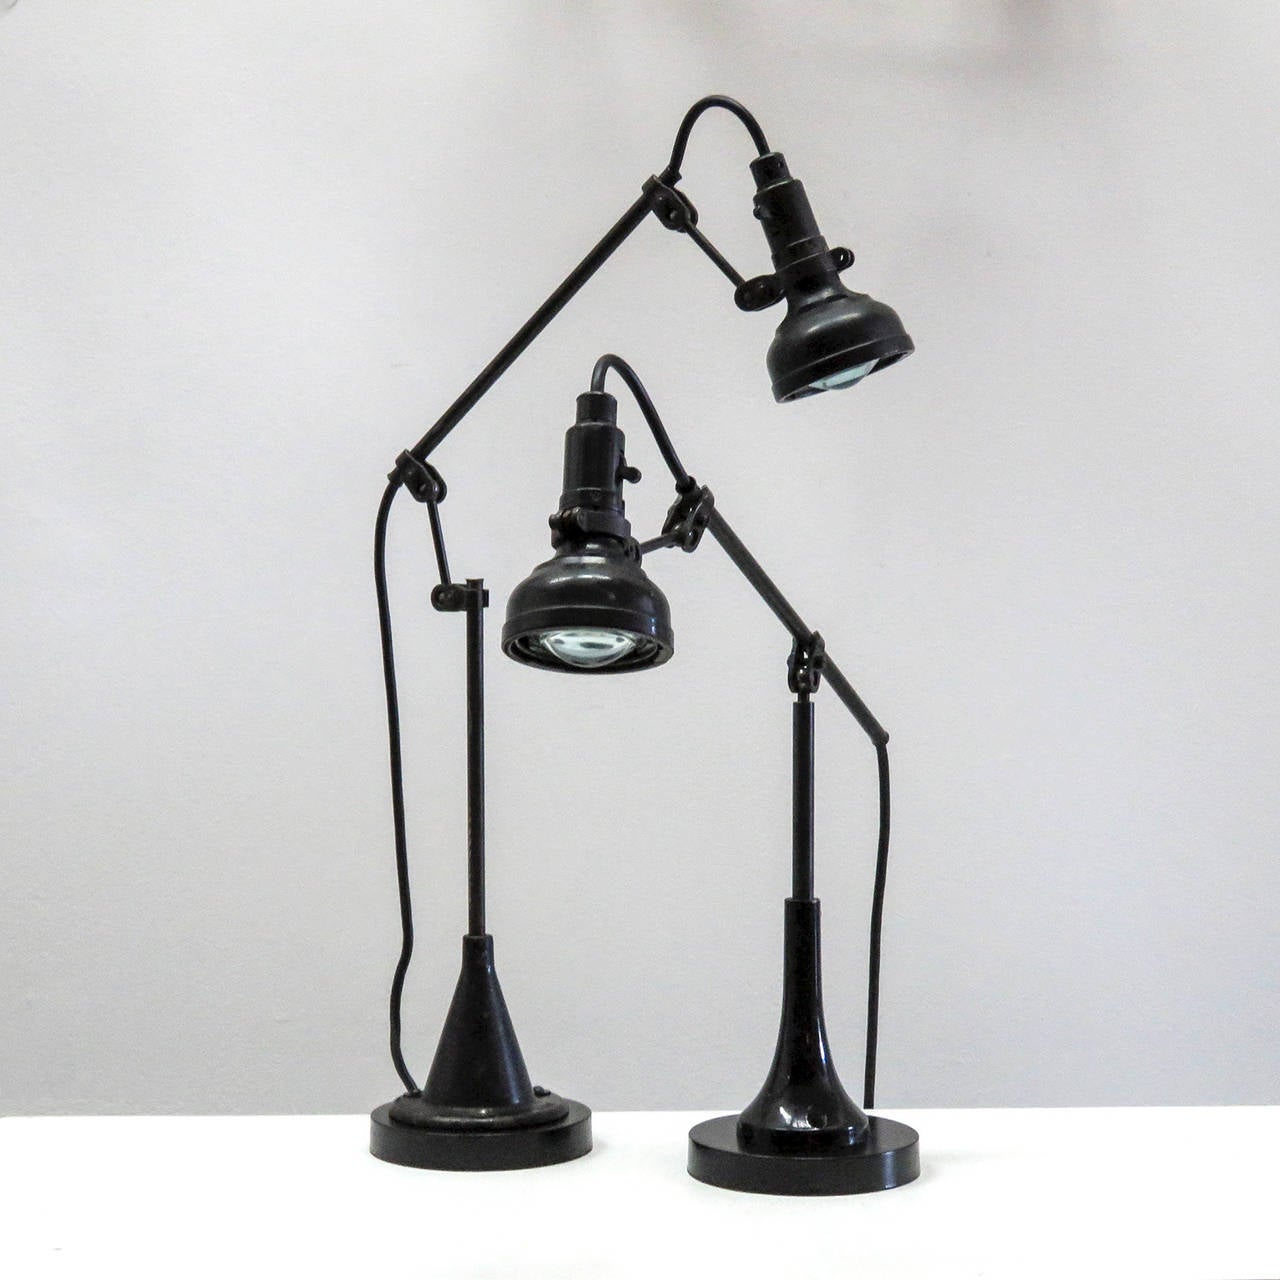 wonderful sewing task lights with original lenses and custom table lamp bases, can alternately be bolted to a table or wall, marked